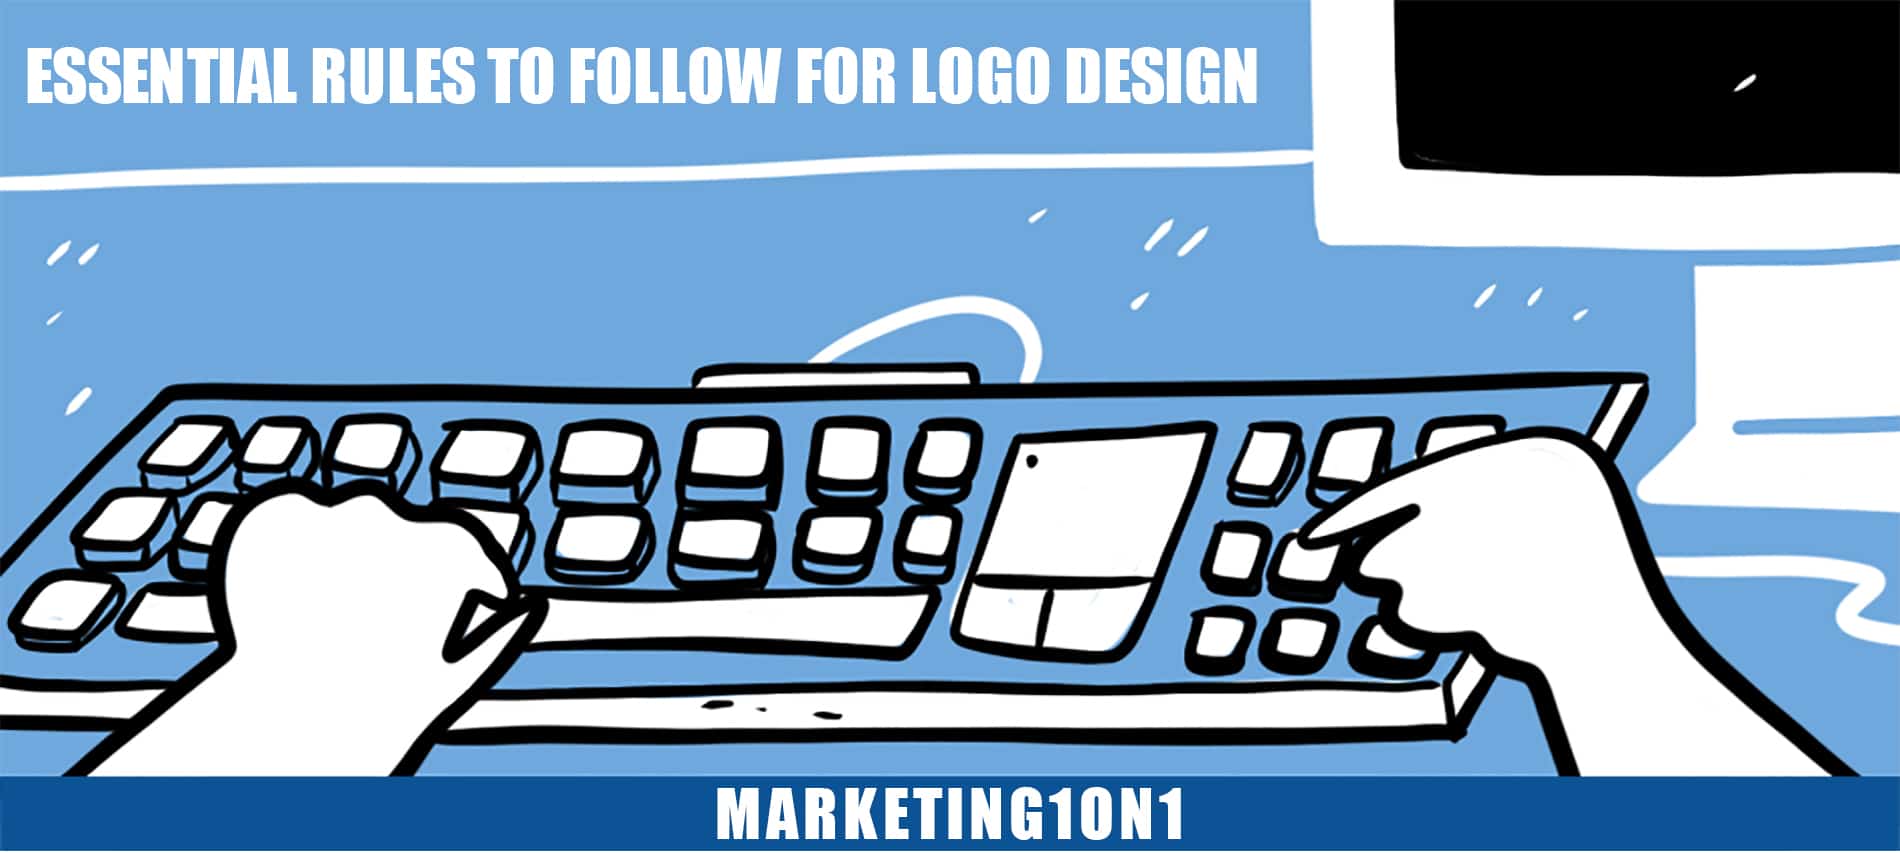 Essential rules to follow for logo design